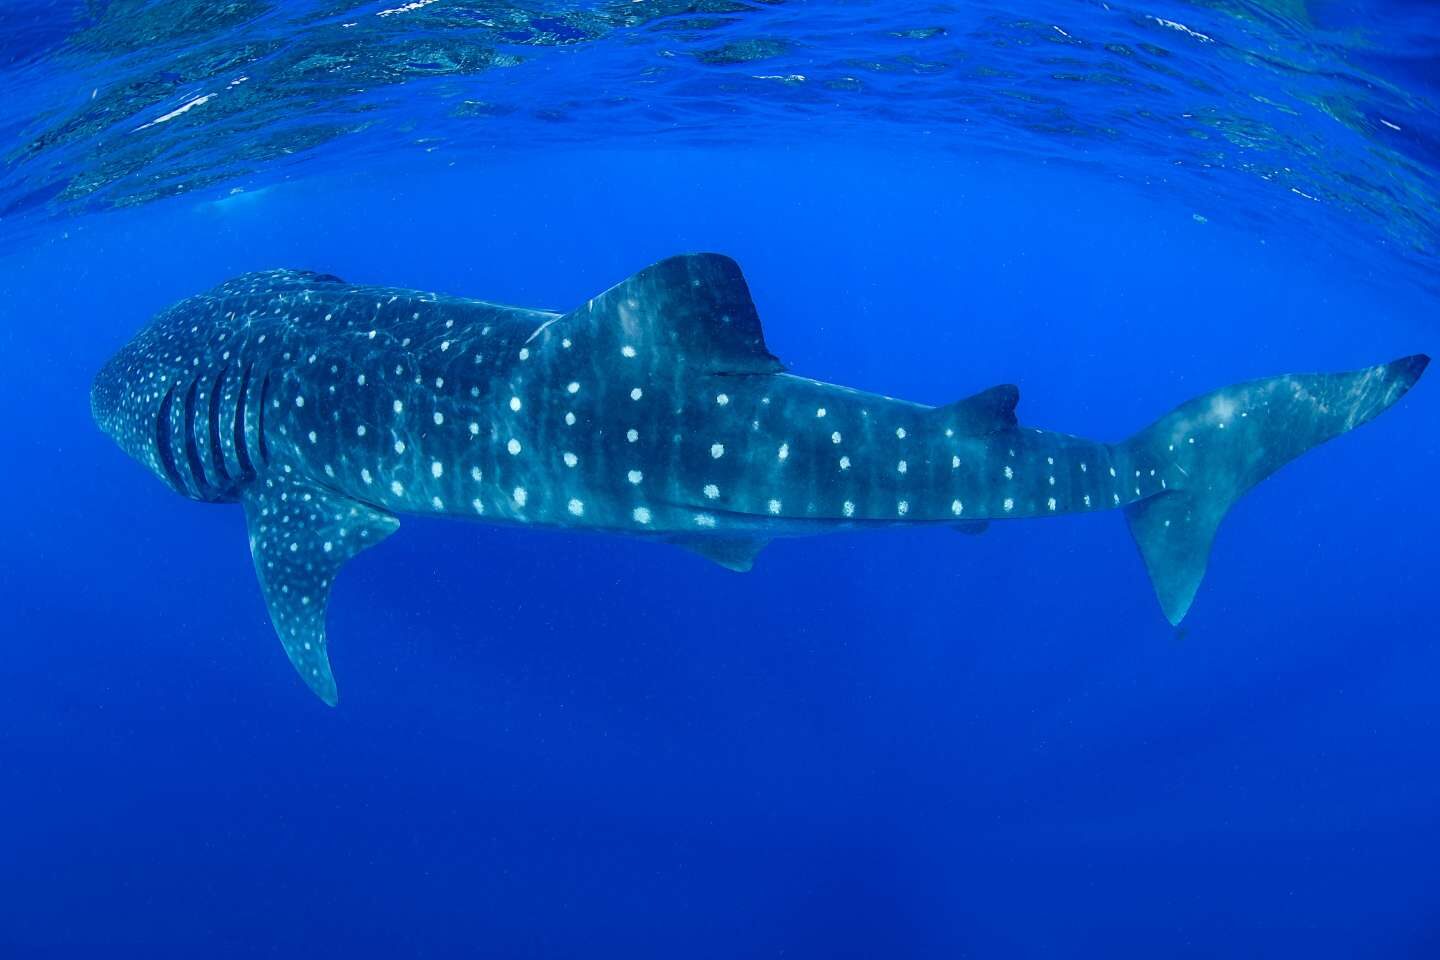 A beautiful shot of whale shark in Isla Mujeres, Mexico